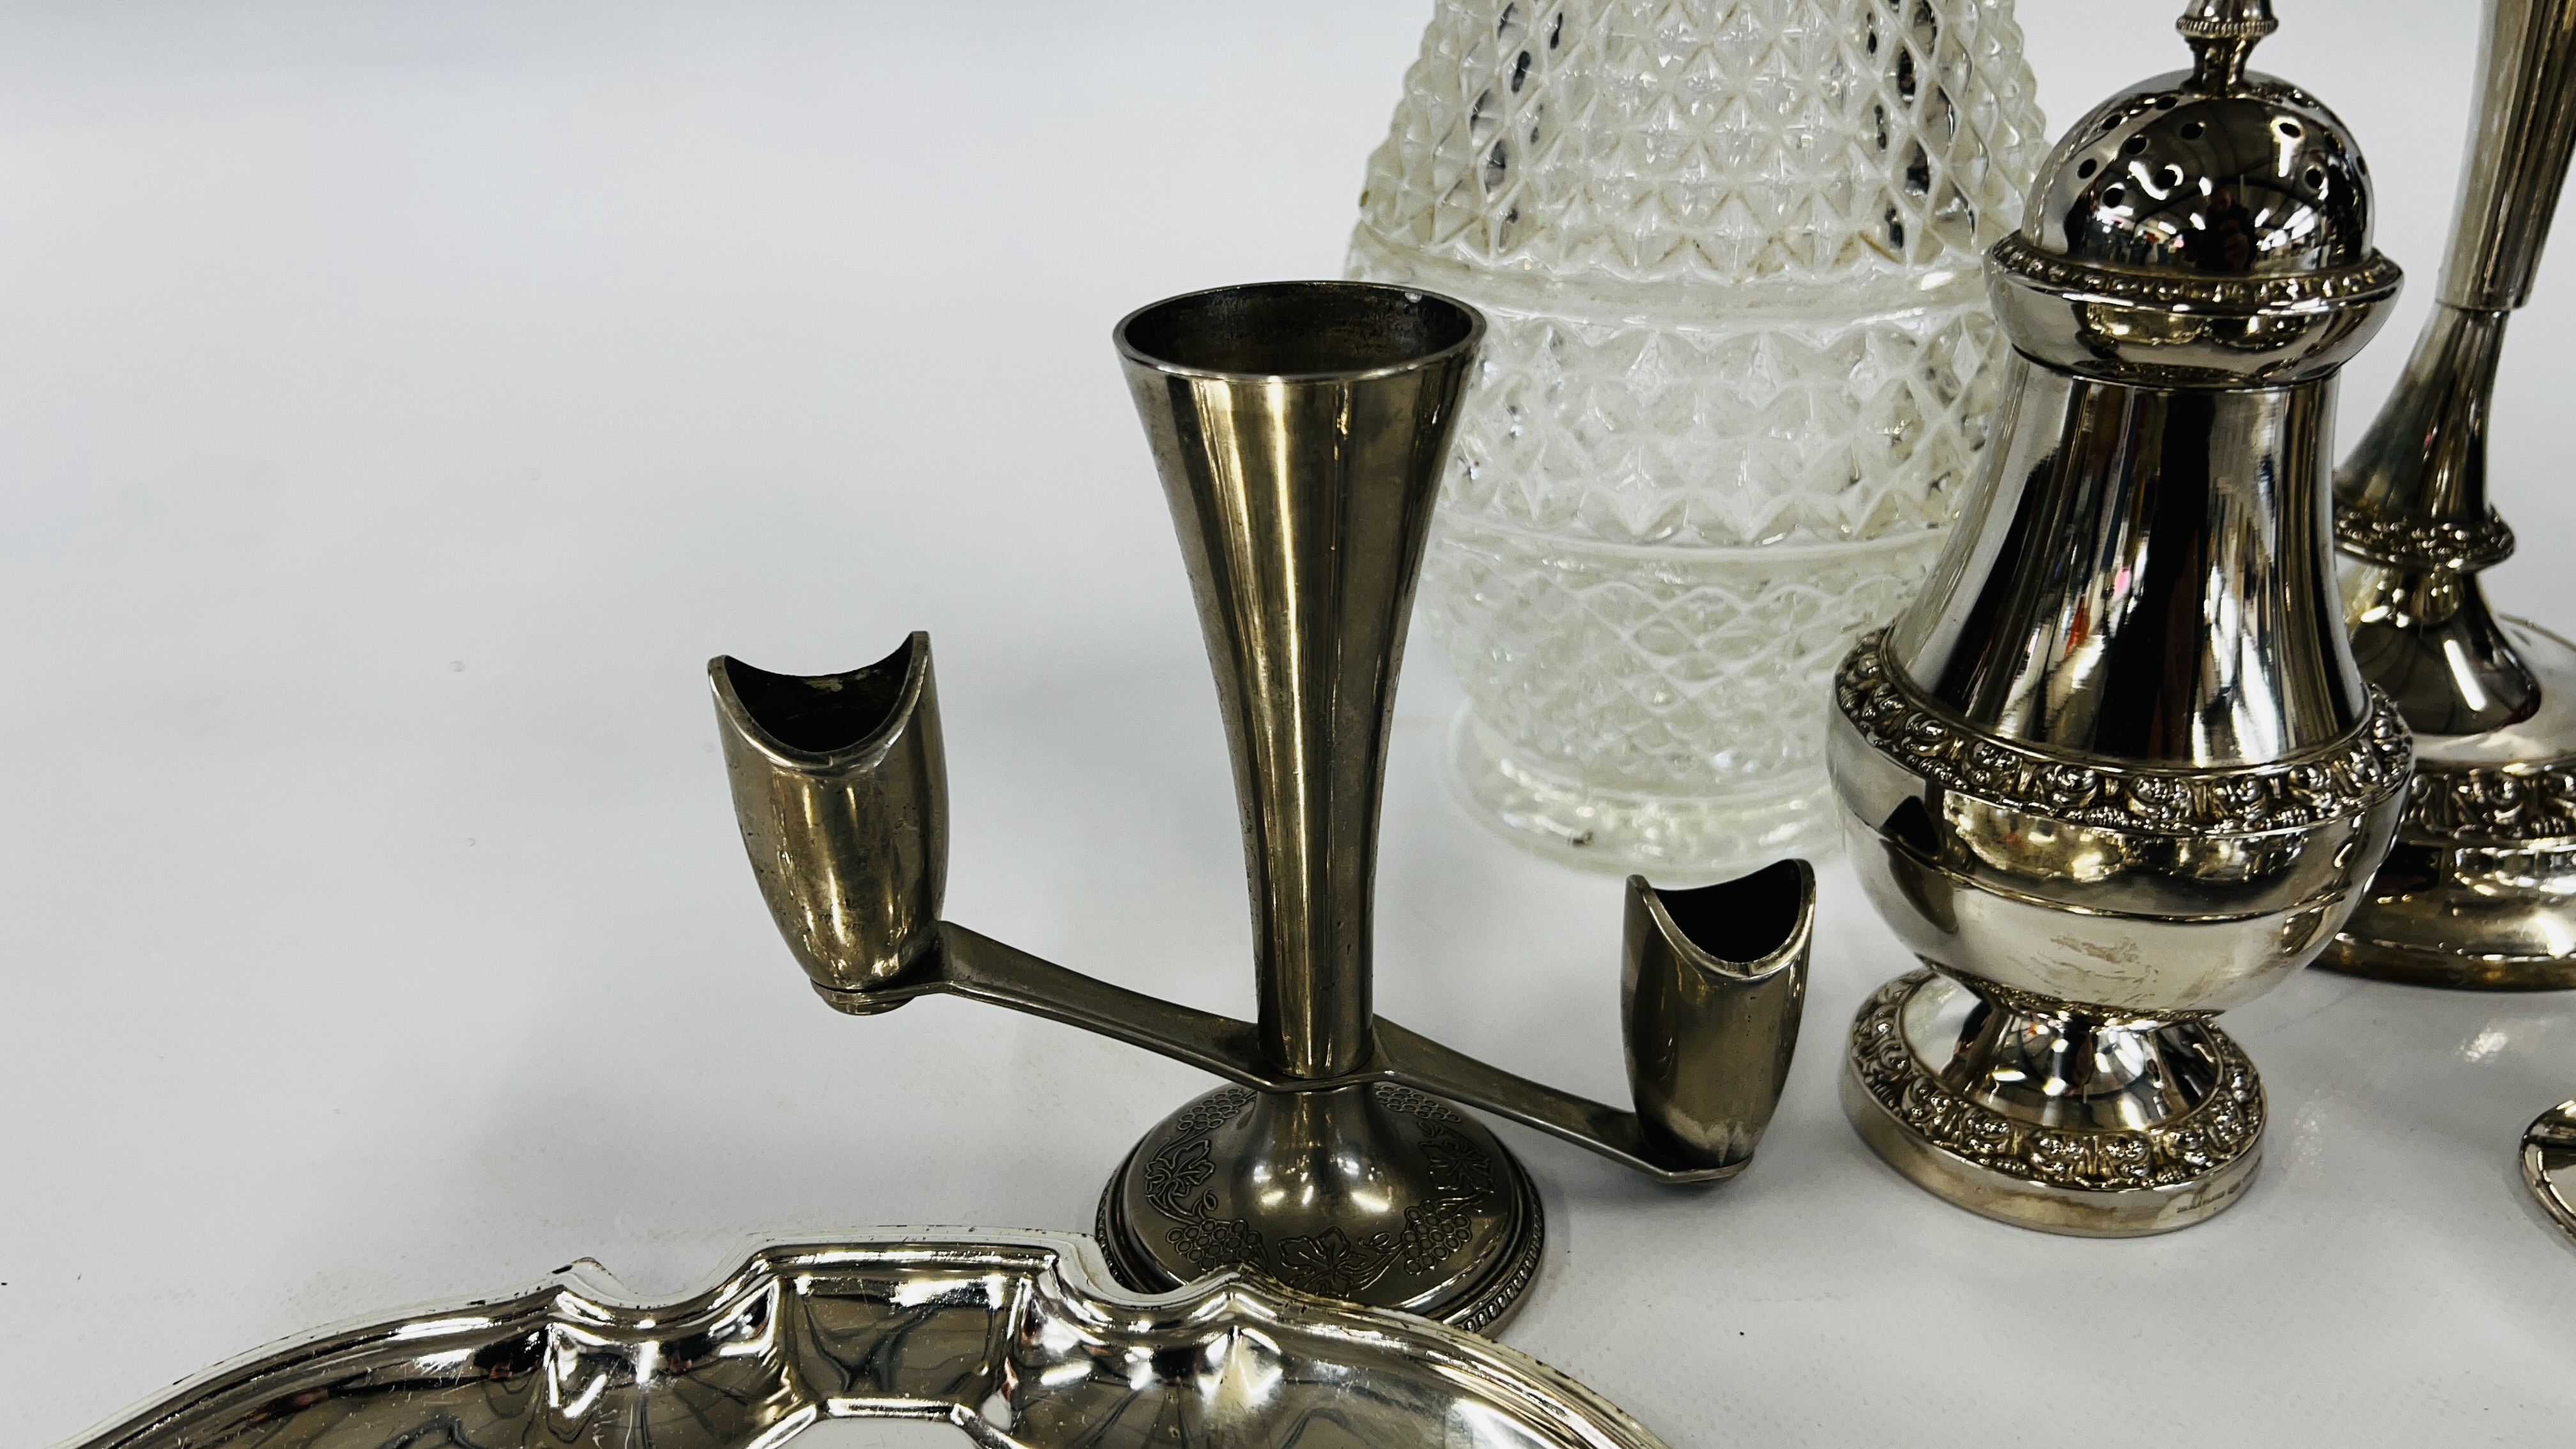 COLLECTION OF PLATED WARE INCLUDING CLARET JUG, SUGAR SIFTER TRAYS, CANDELABRA ETC. - Image 6 of 7